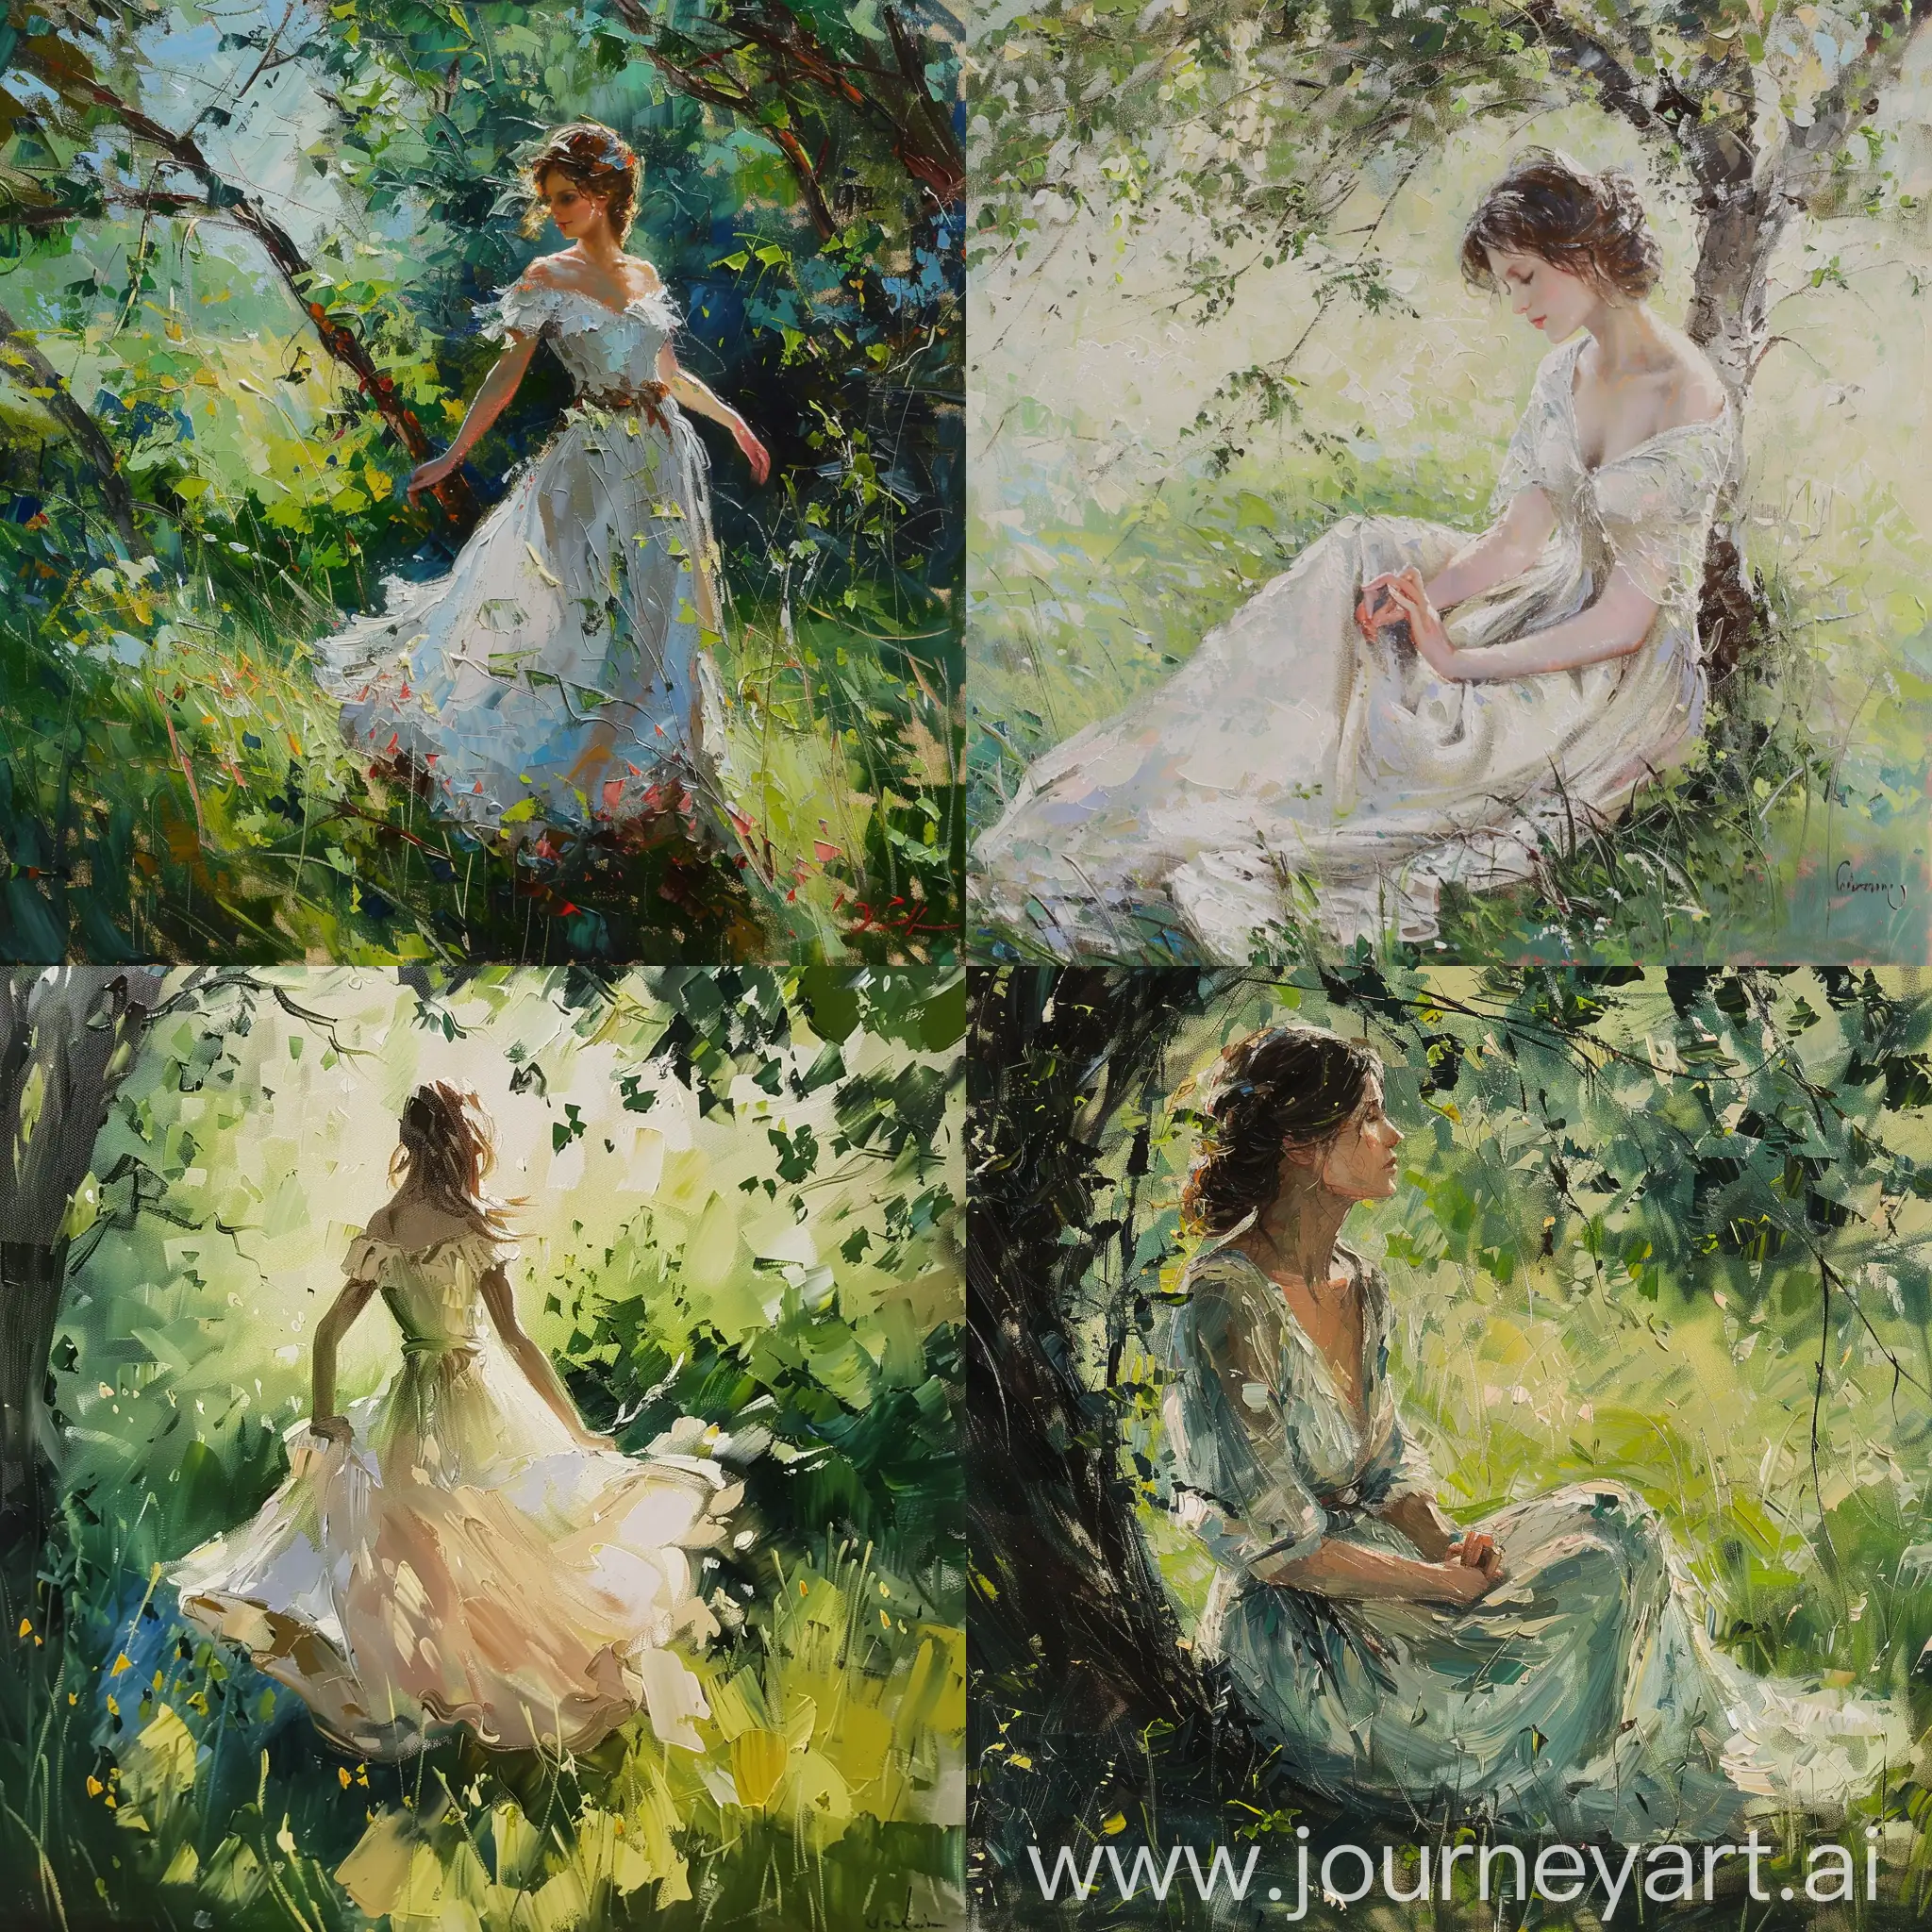 Elegant-Lady-in-White-Gown-Amidst-Lush-Meadow-4K-Impressionism-Painting